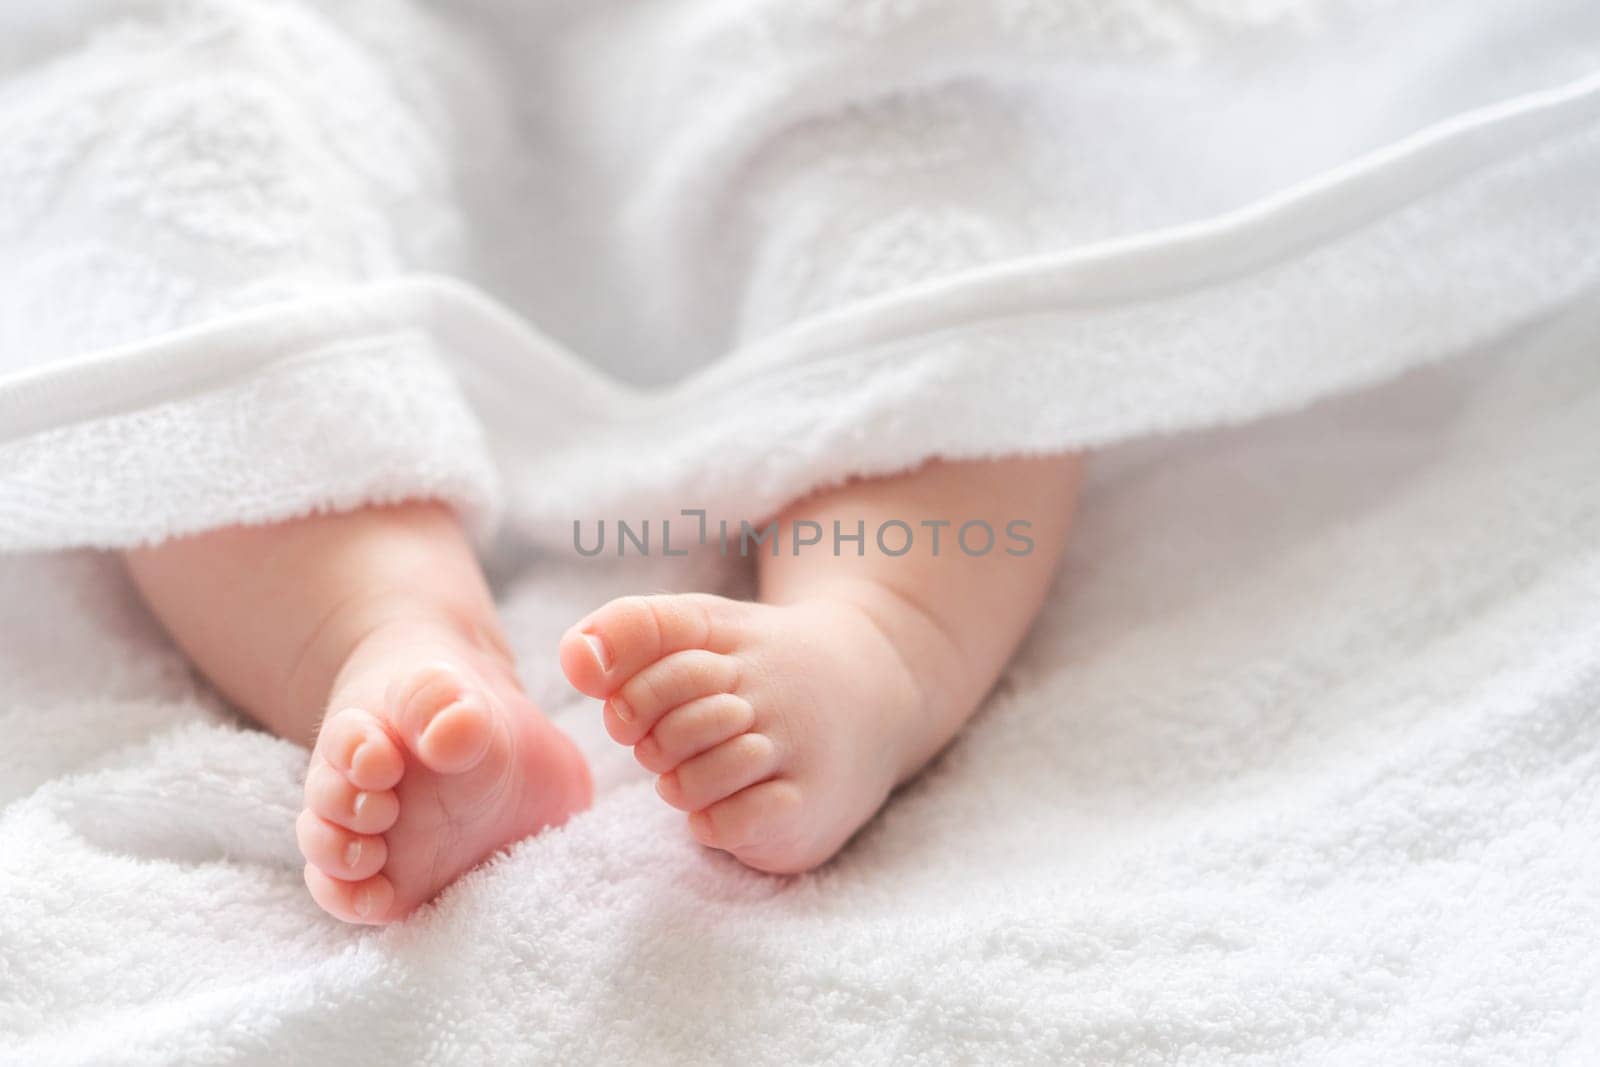 Soft white towel revealing the tiny feet and legs of an infant child, capturing the essence of post-bath calm and cleanliness